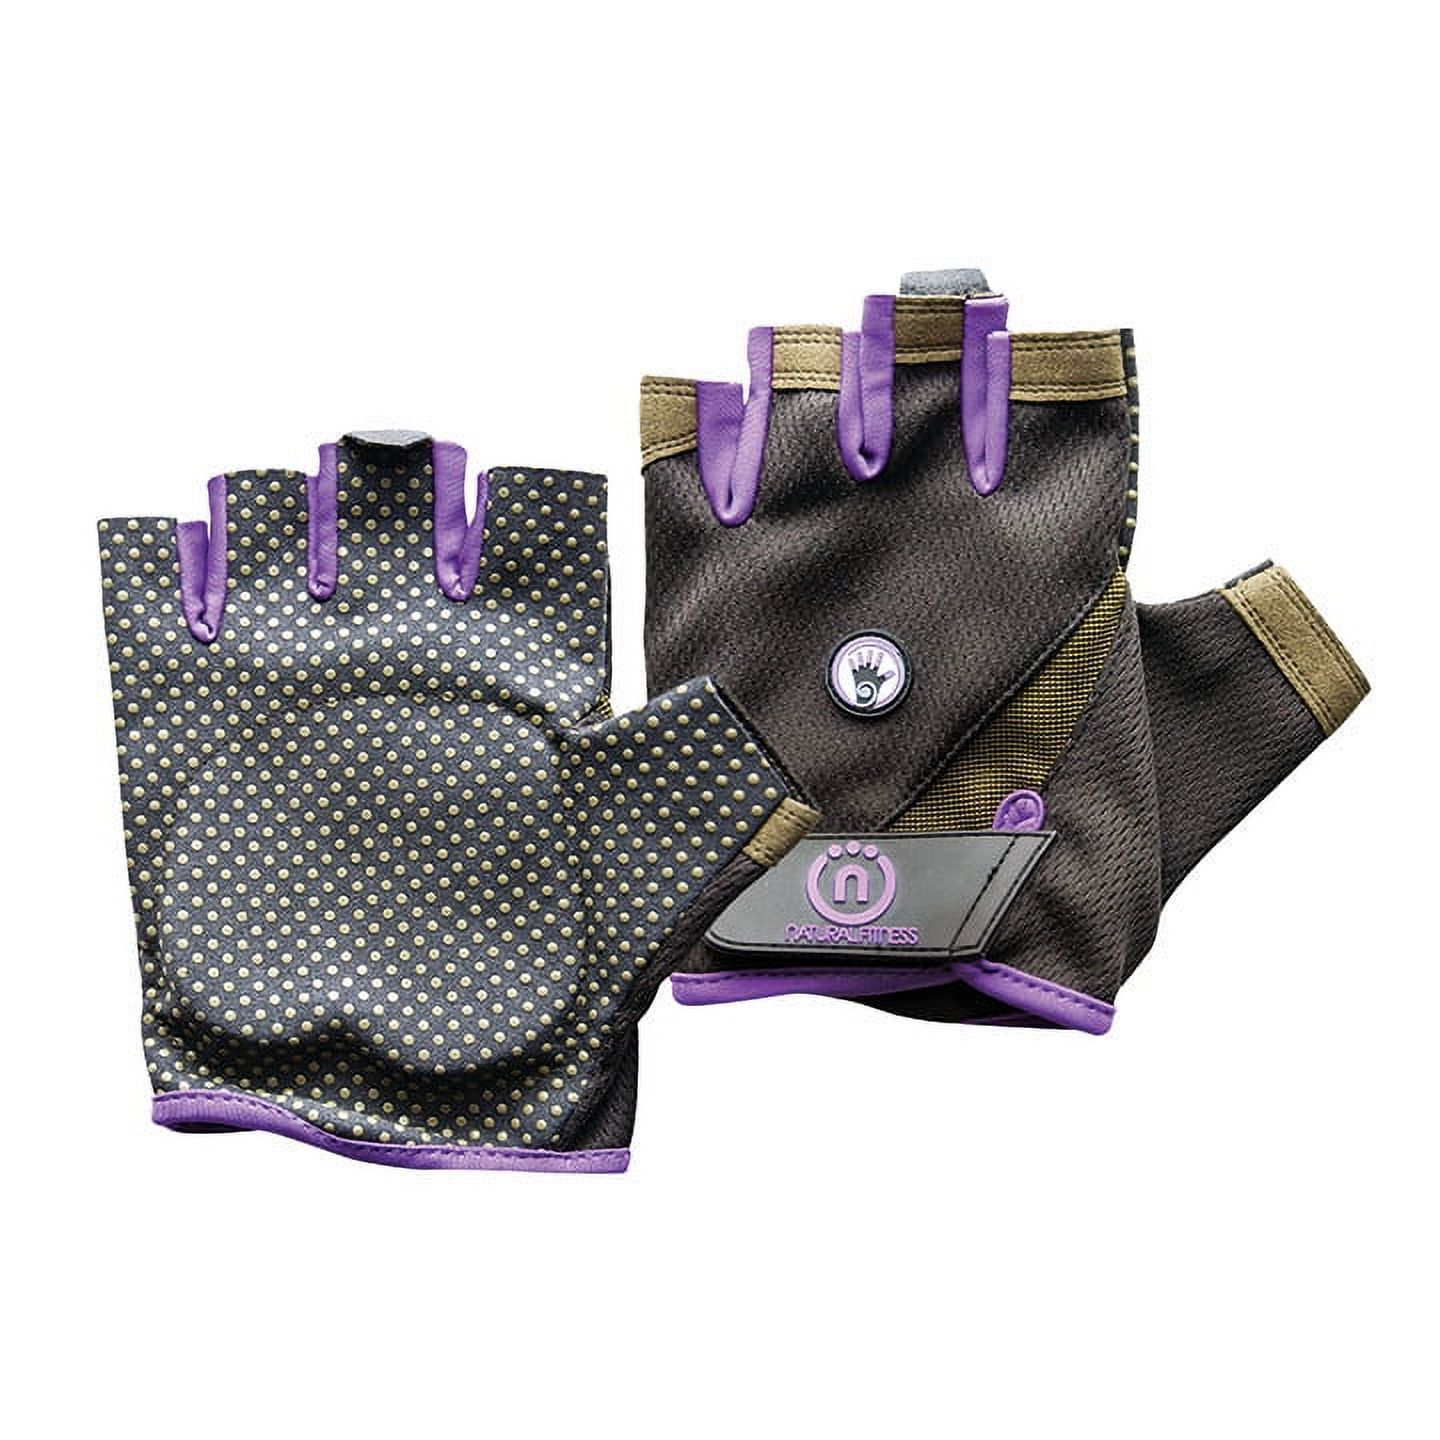 Natural Fitness Wrist Assist Gloves for Extra Support Needed During Yoga, Pilates, Weight-Training, and More – Small - image 1 of 3